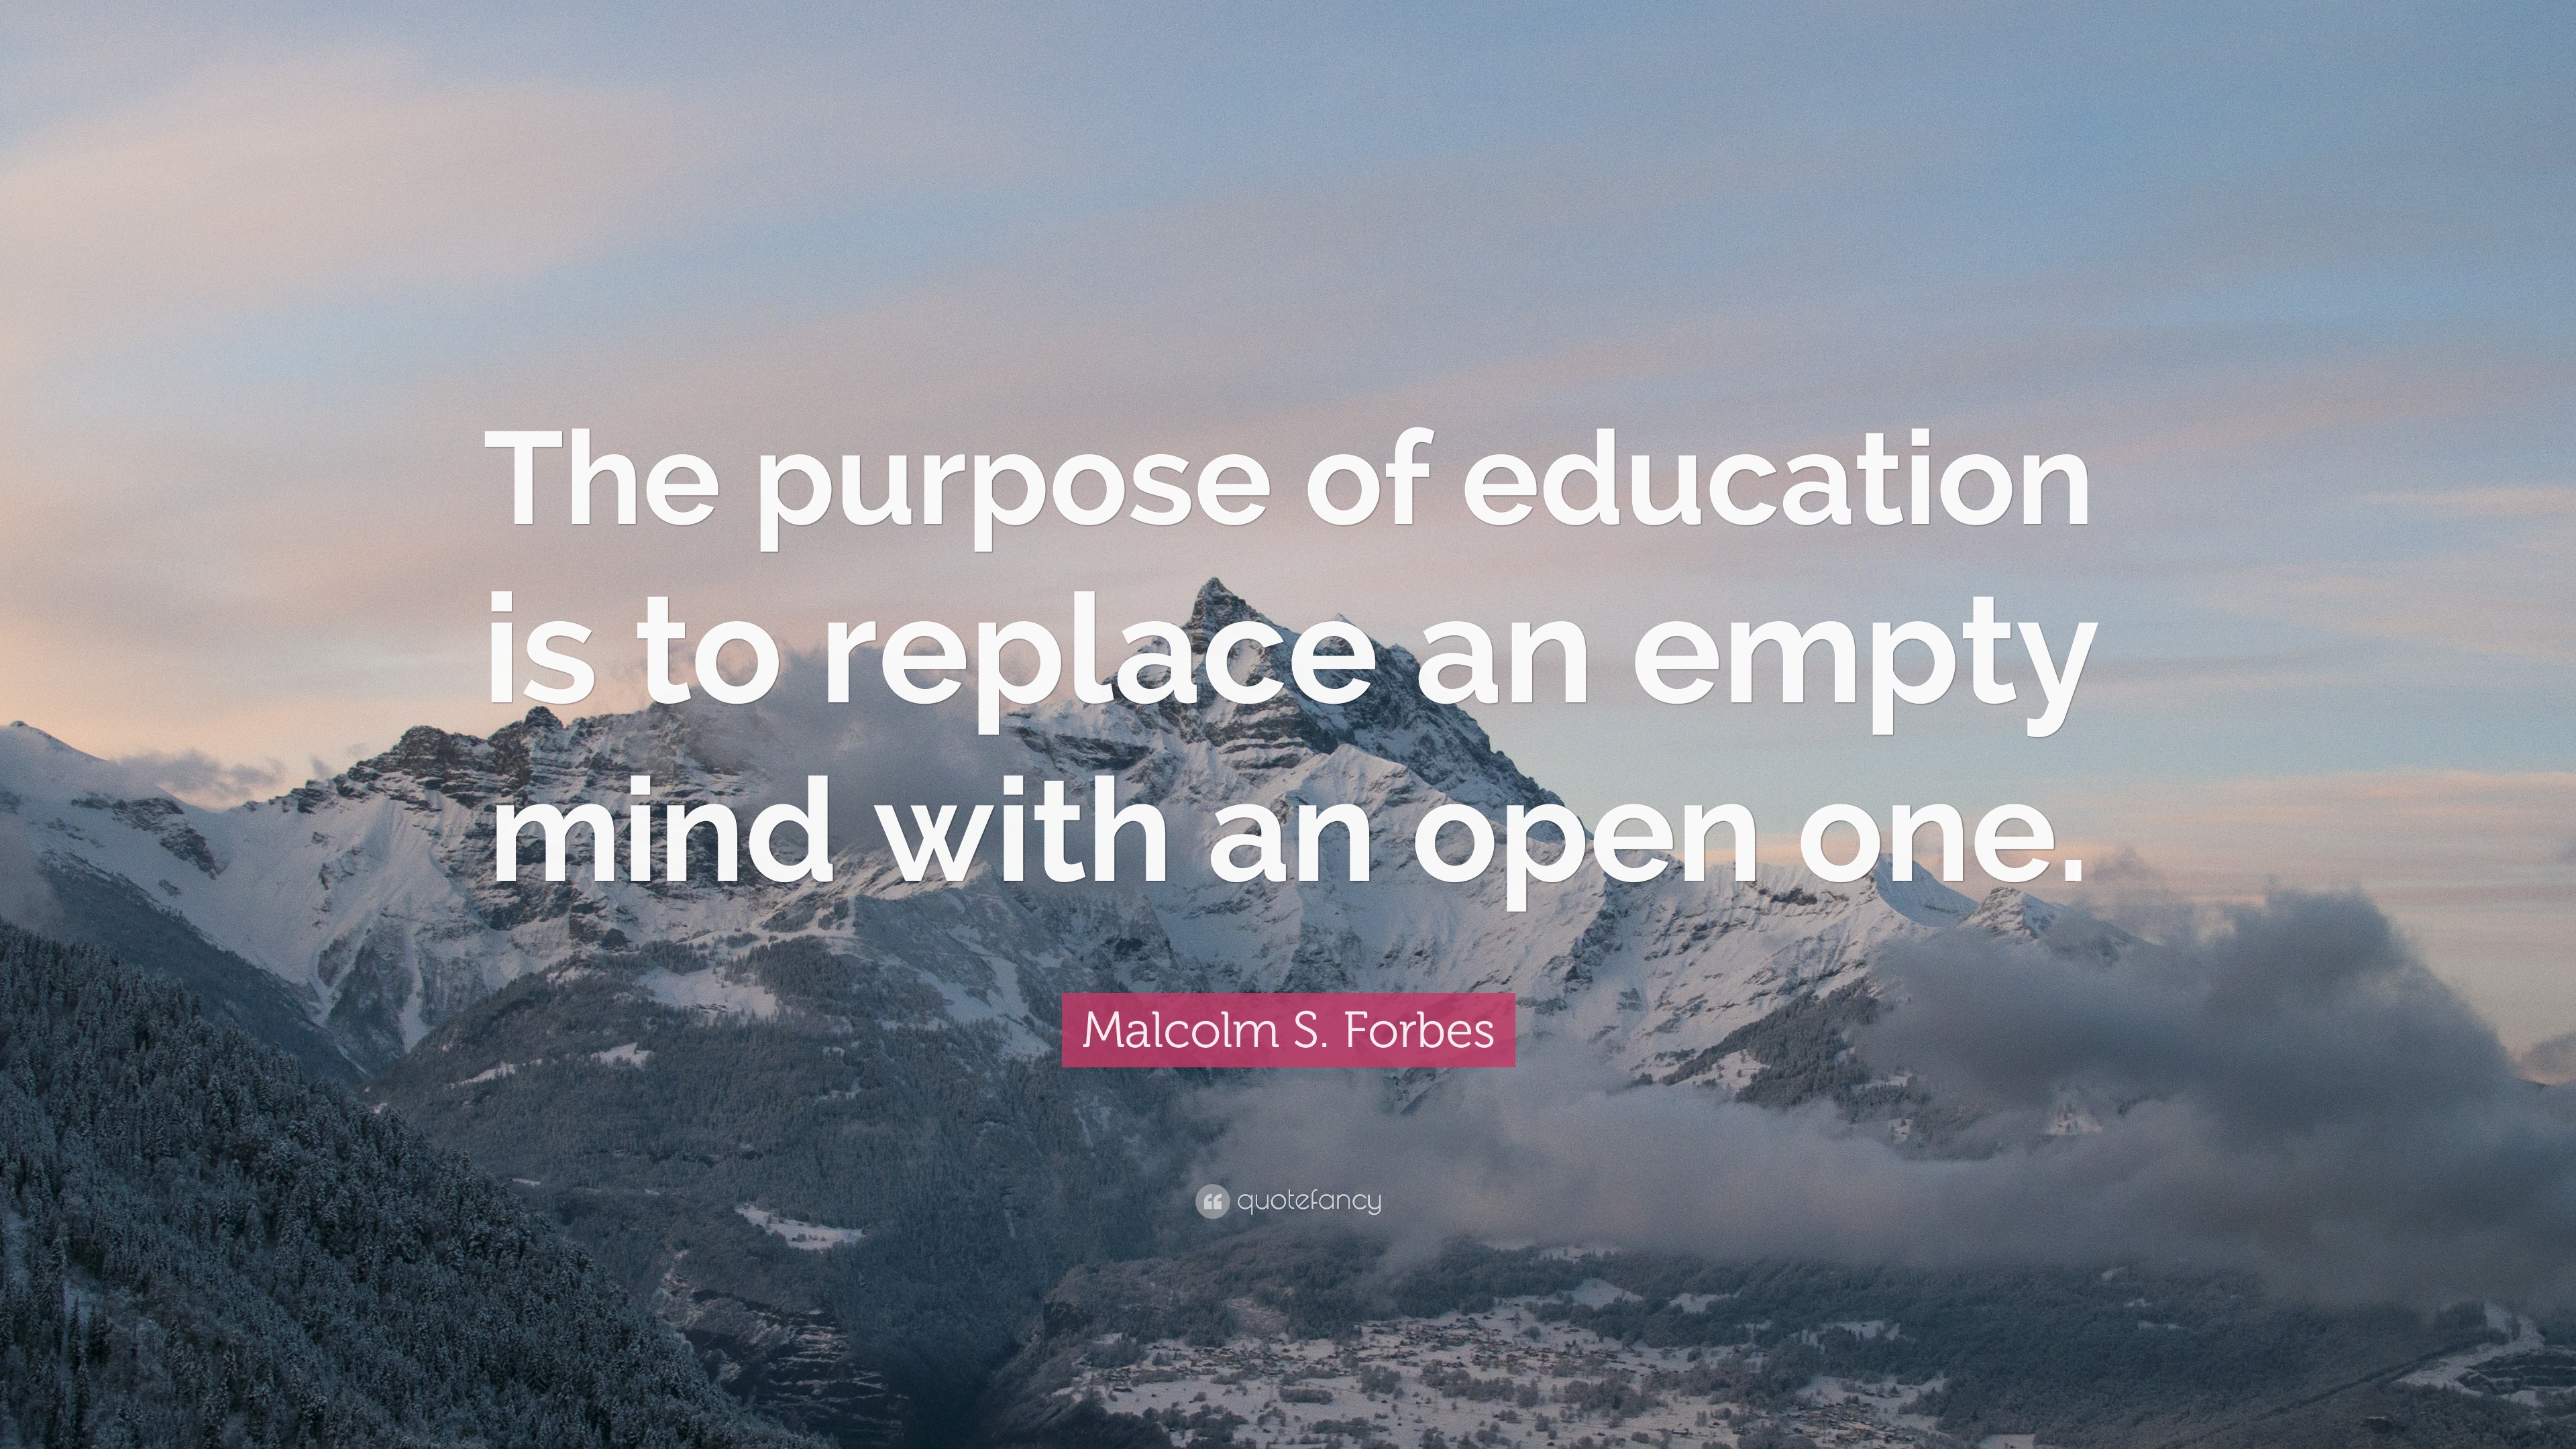 95 Most Inspiring Education Quotes That Will Make You Love Learning Again